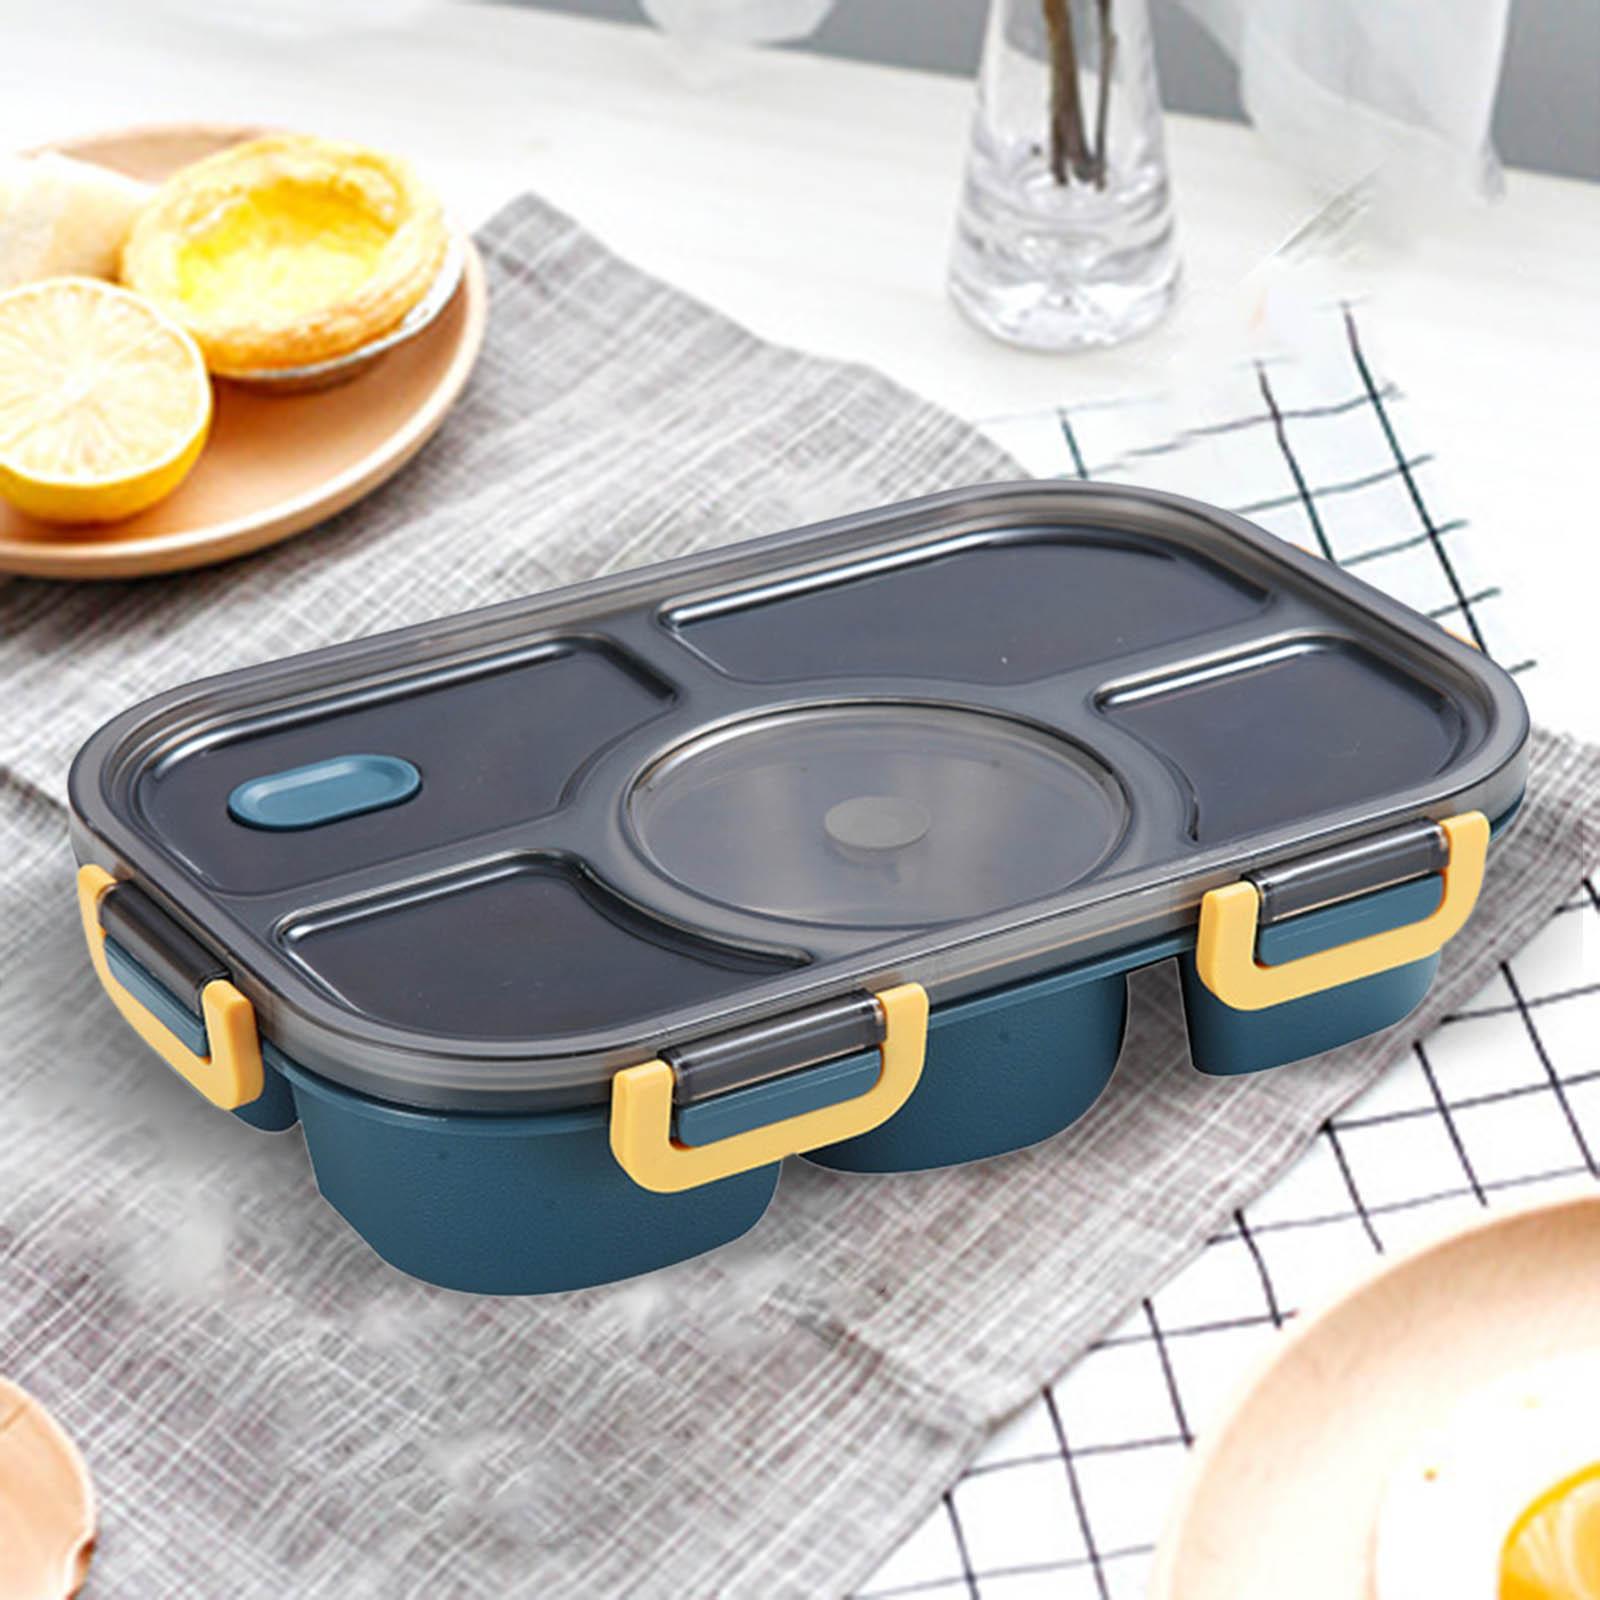 Portable Lunch Box Bento Box Multifunctional for Hiking Camping